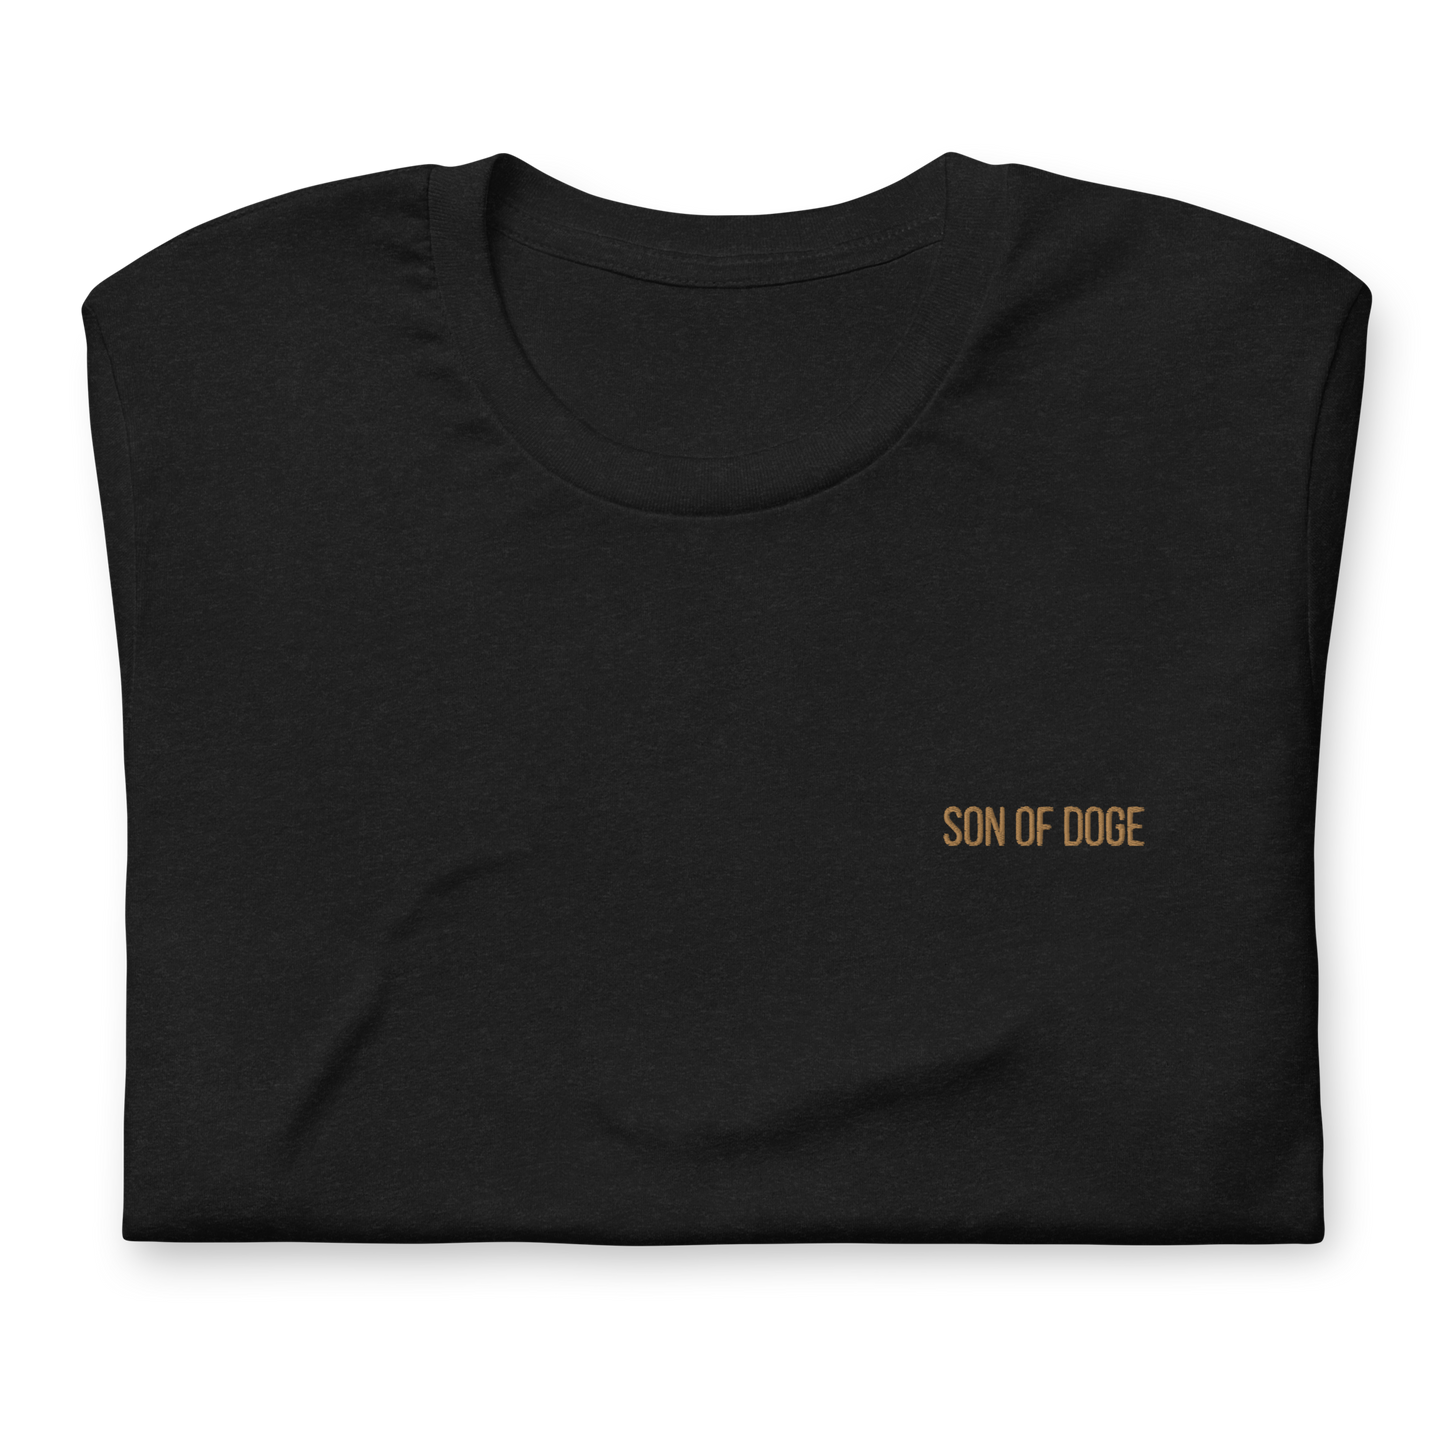 Son Of Doge t-shirt